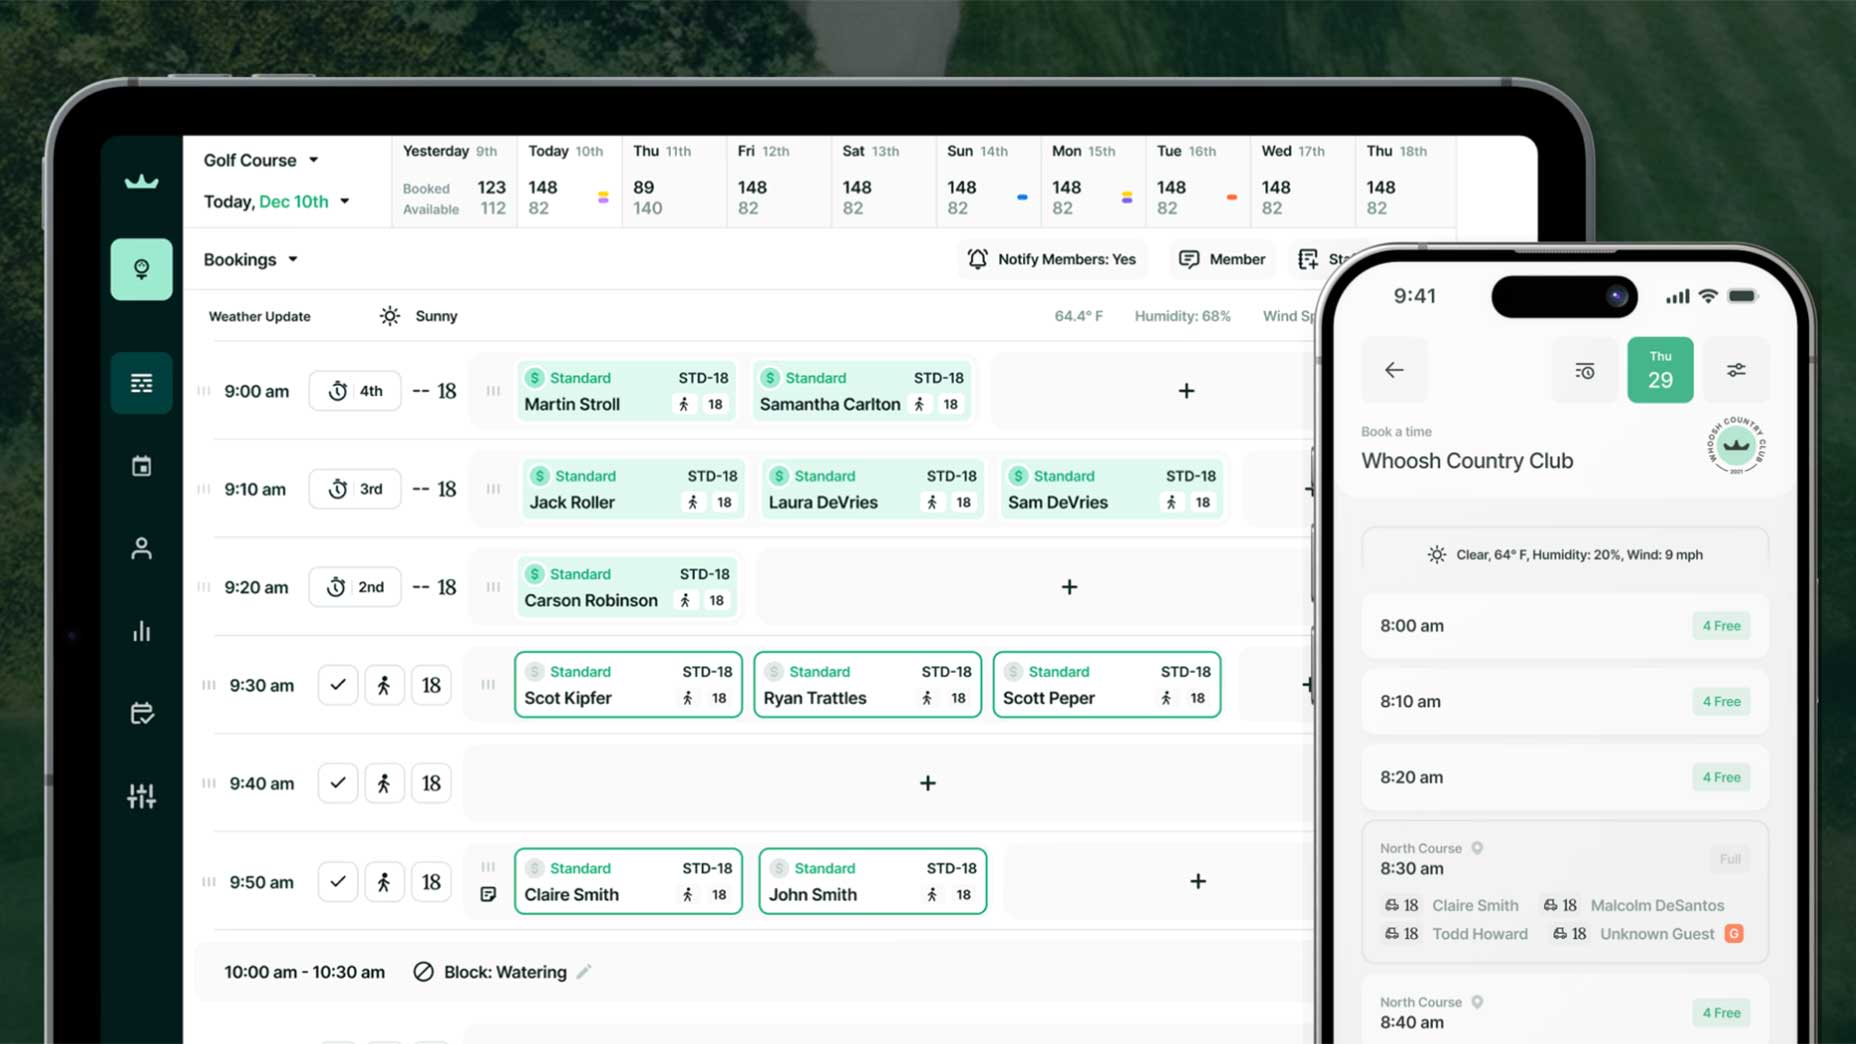 This software is quietly making golf-club experiences even better